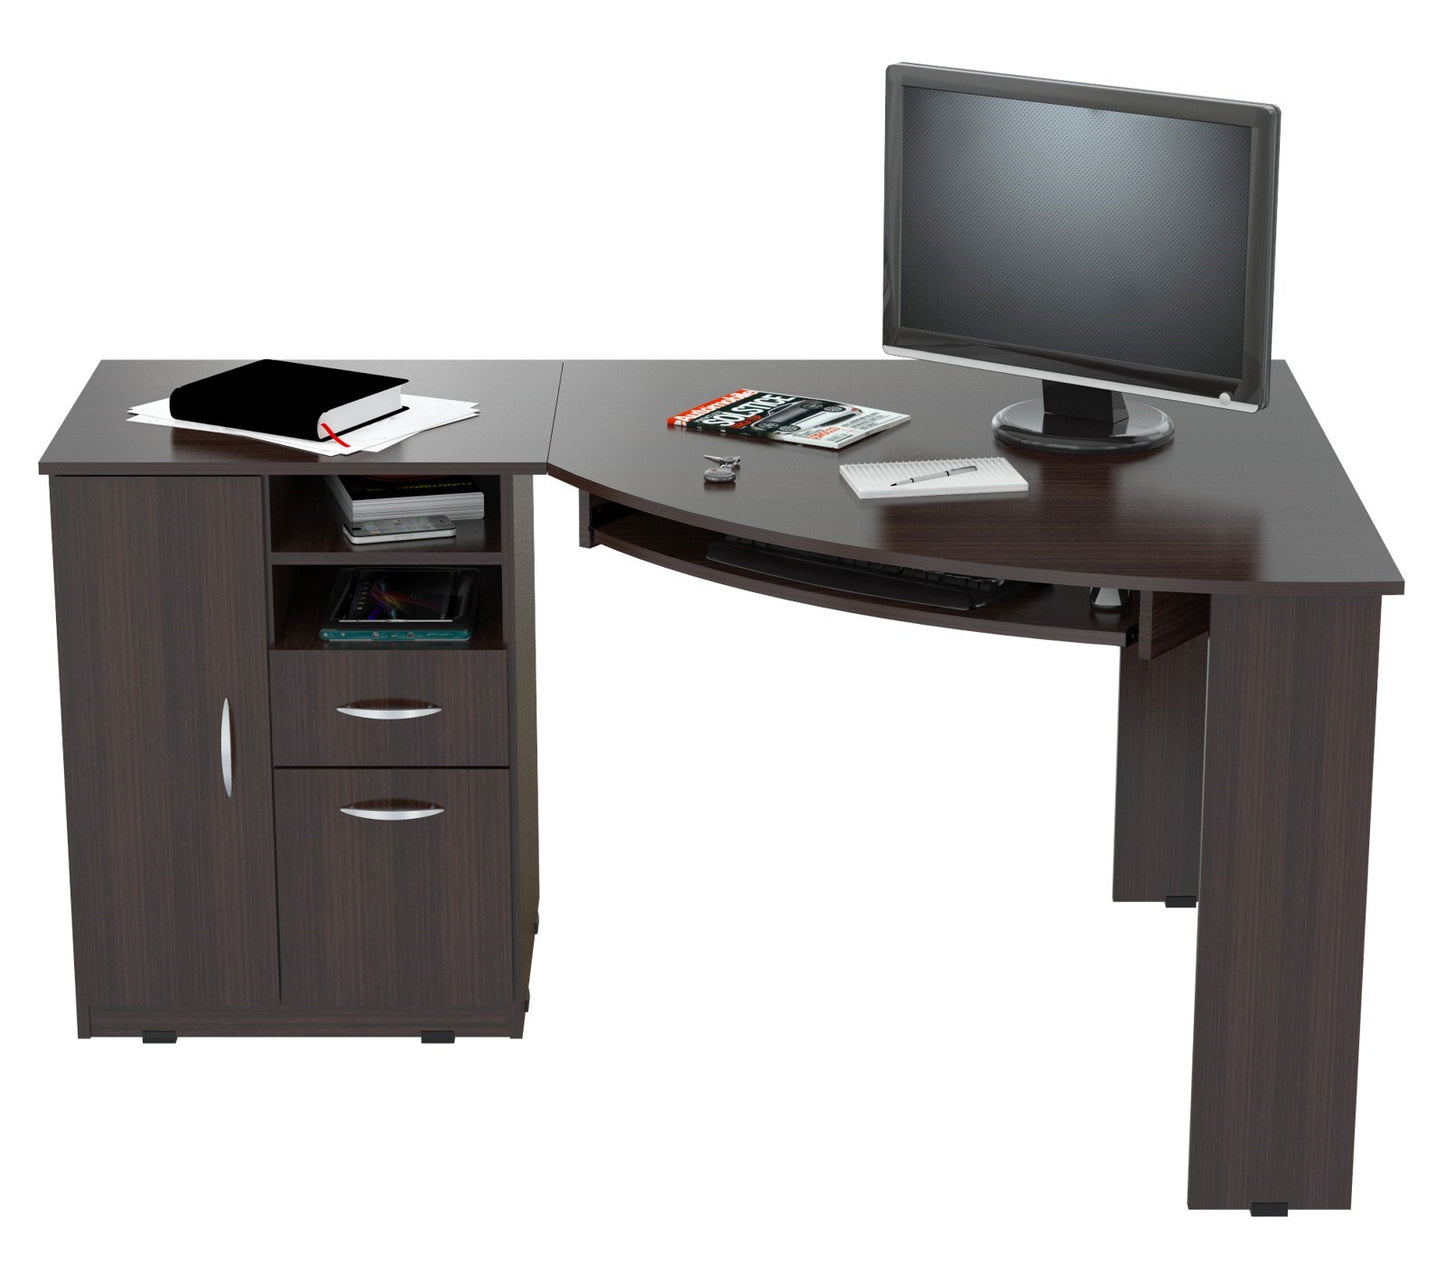 59" Espresso Corner Computer Desk With Two Drawers